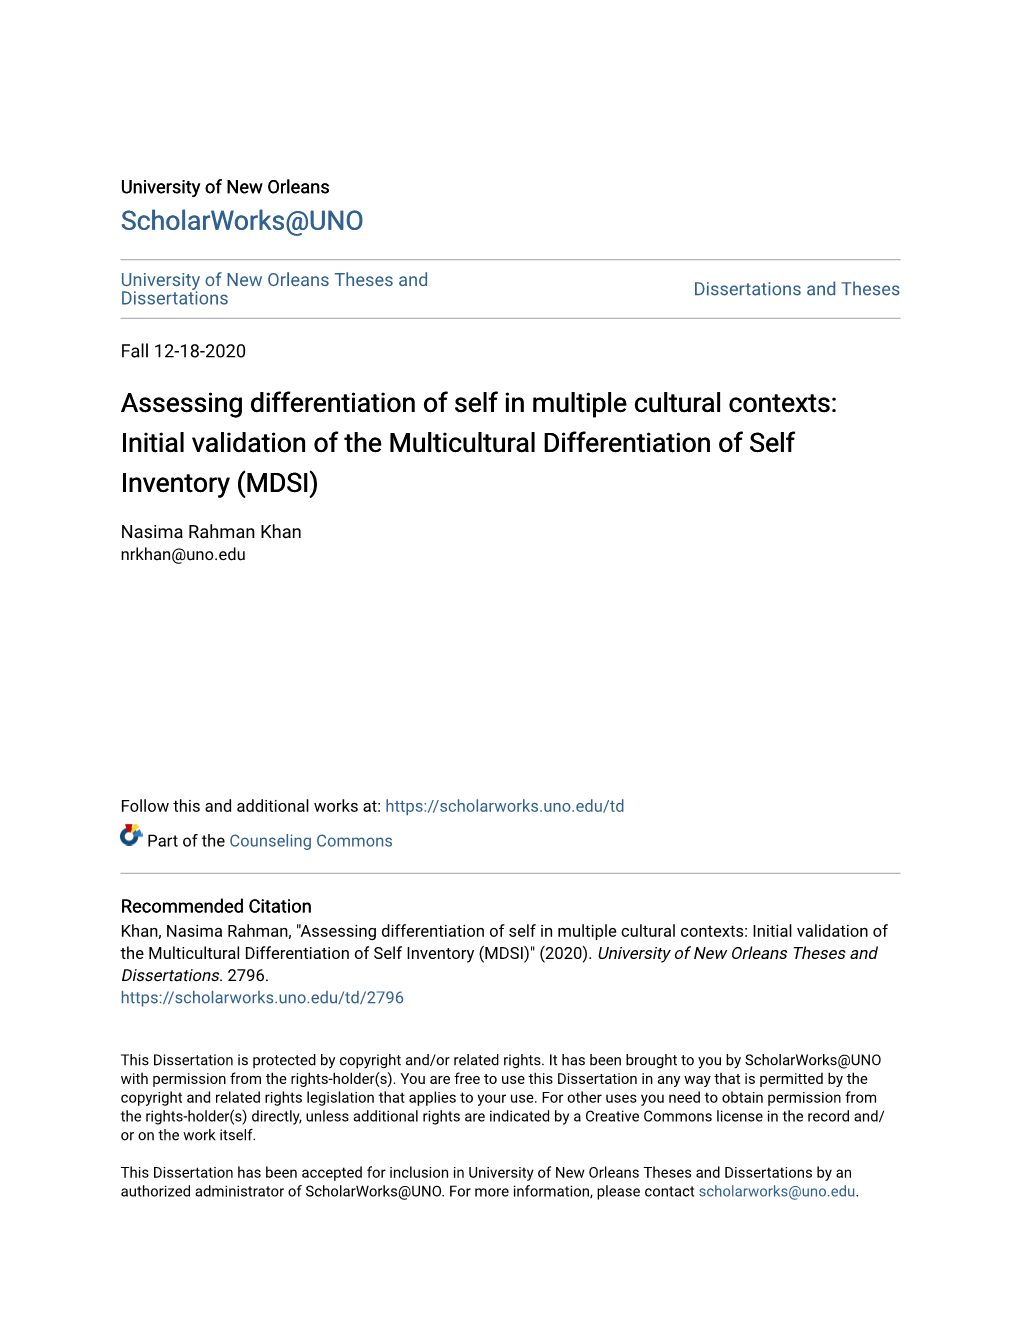 Assessing Differentiation of Self in Multiple Cultural Contexts: Initial Validation of the Multicultural Differentiation of Self Inventory (MDSI)